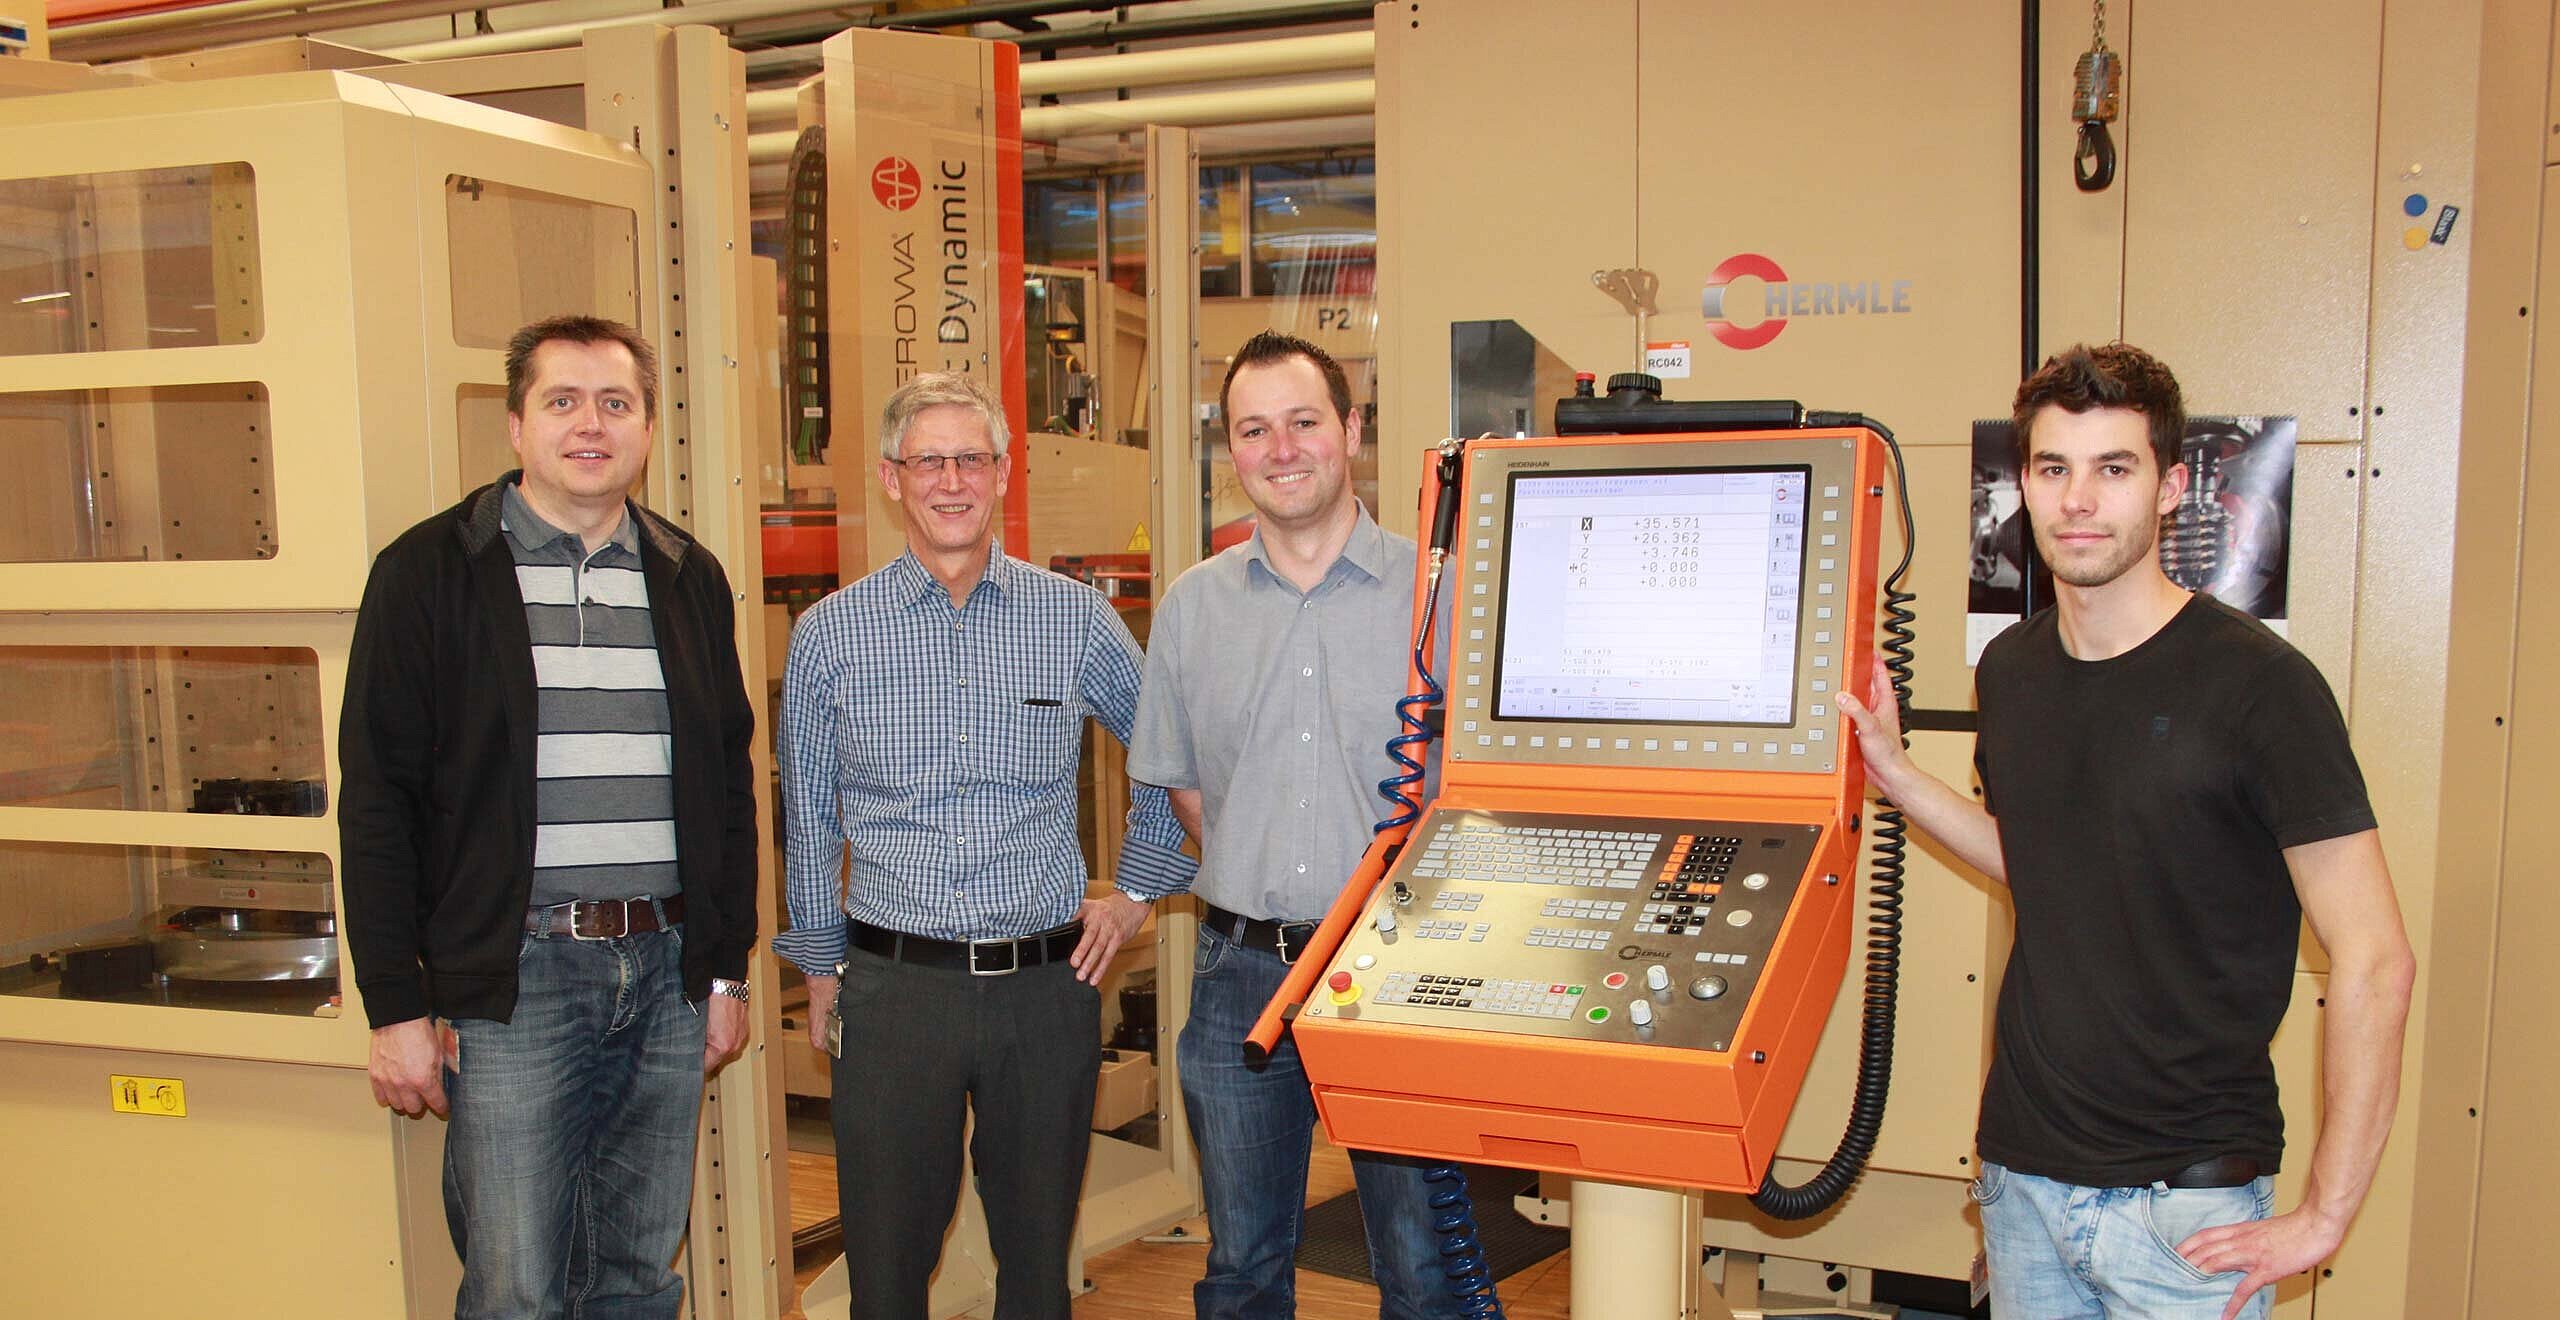 Klaus Holzer, Master Mould Maker responsible for the MPA project, Gerhard Gorbach, Manager of Equipment Manufacturing, Helmut Böhler, Department Milling Master and the machine operator Huf Mathias, all from Julius Blum GmbH